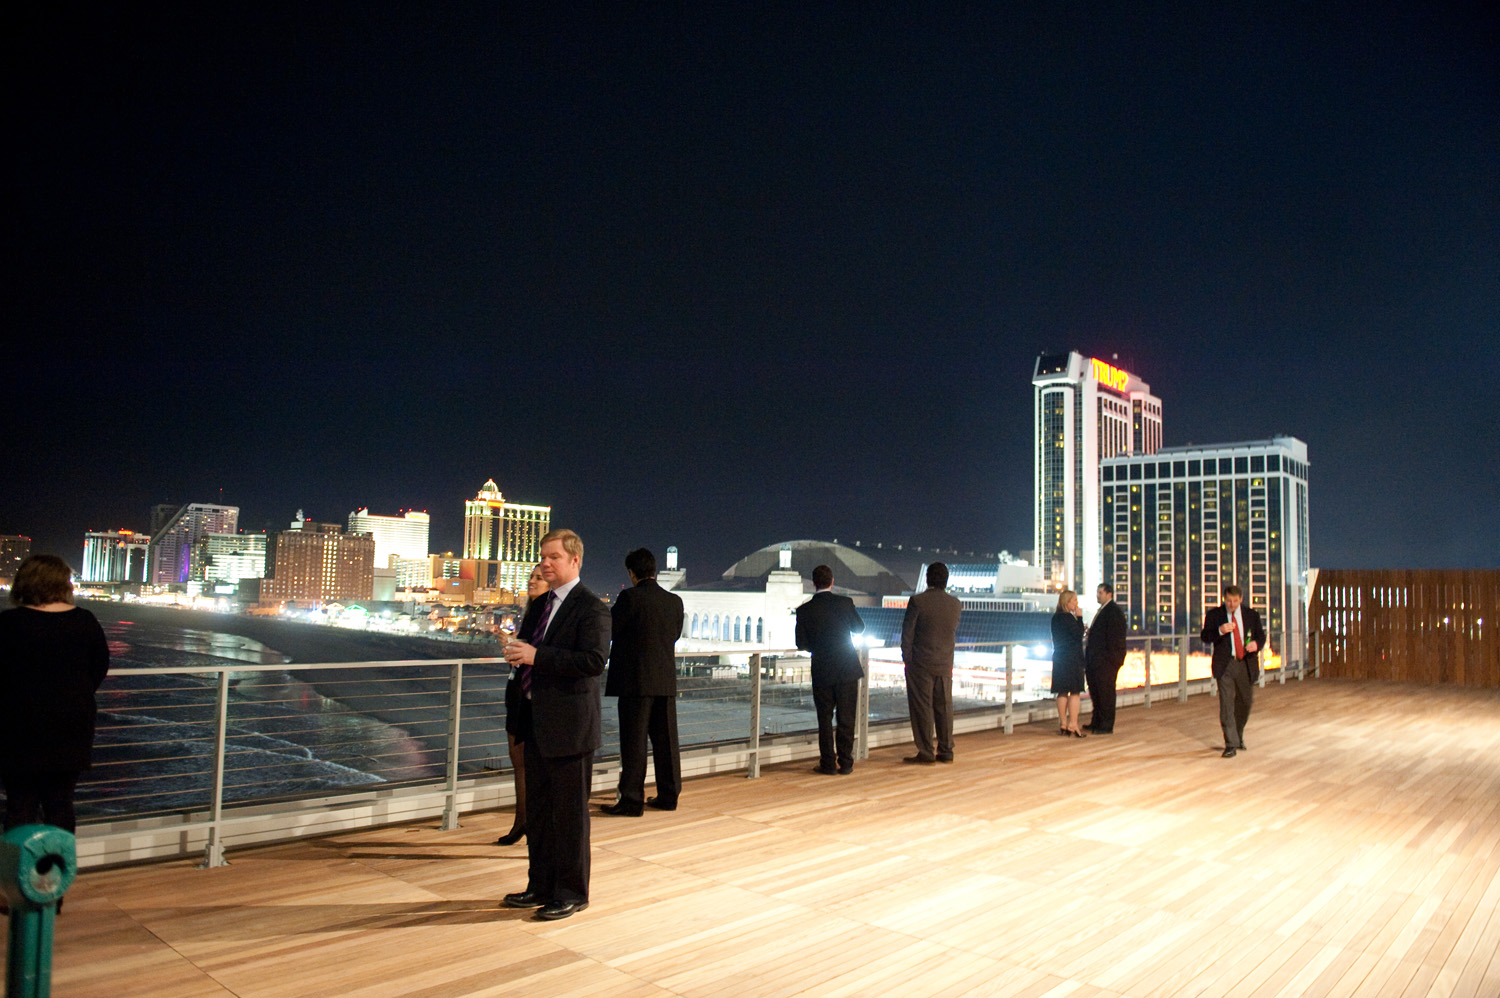 People standing on the Altantic One rooftop terrace overlooking the Atlantic City boardwalk